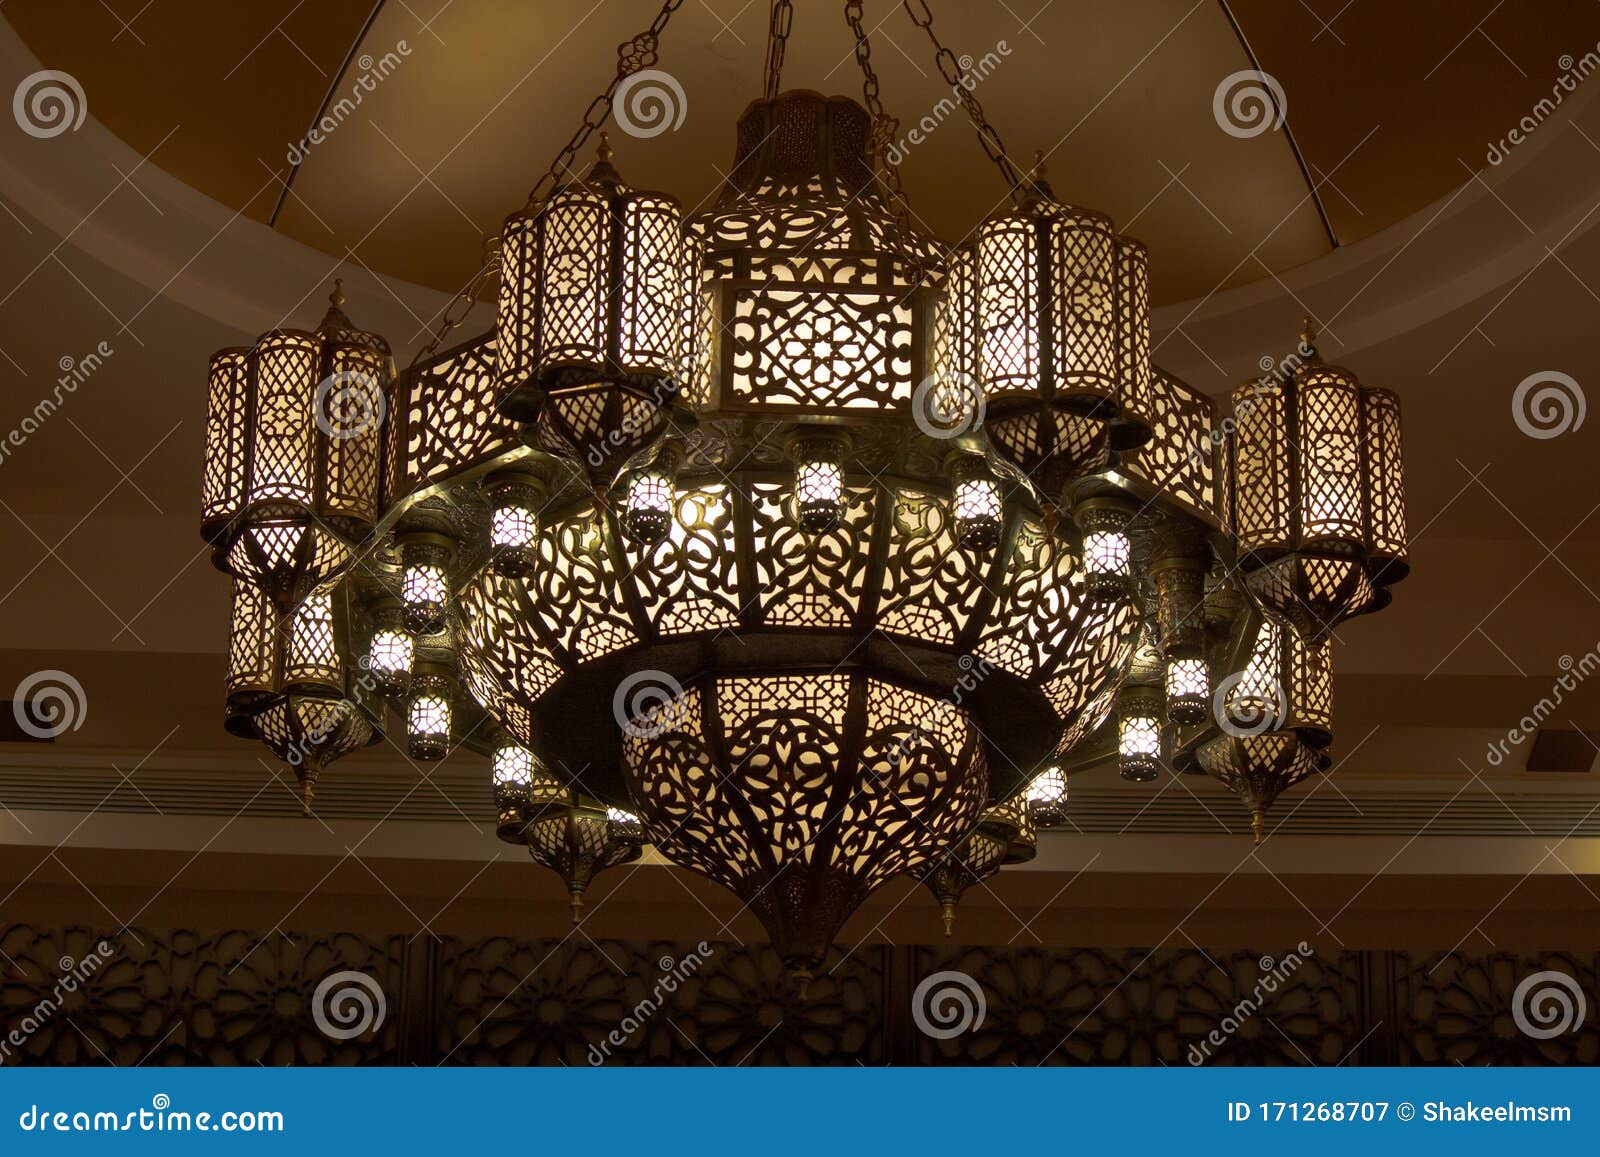 Morocco Ornate Metal Lamp in the Wall of a Mosque, Qatar.Morocco Style